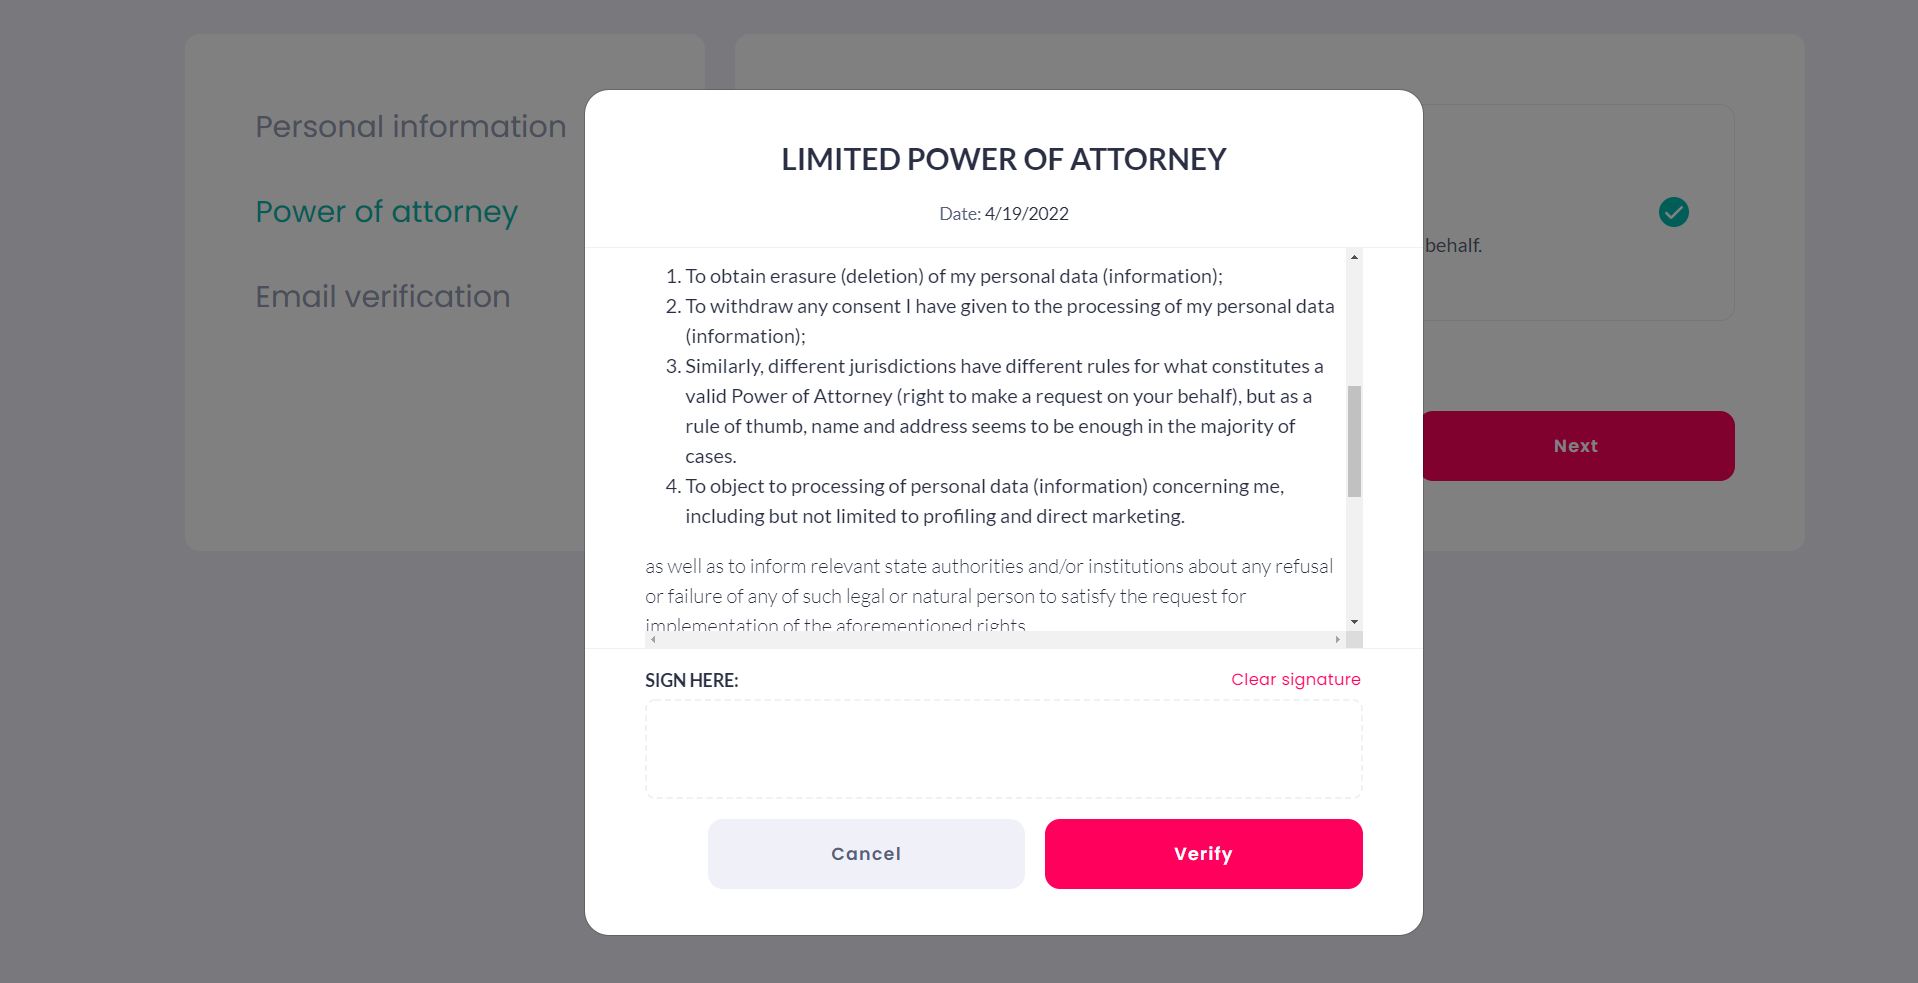 Sign the limited power of attorney document